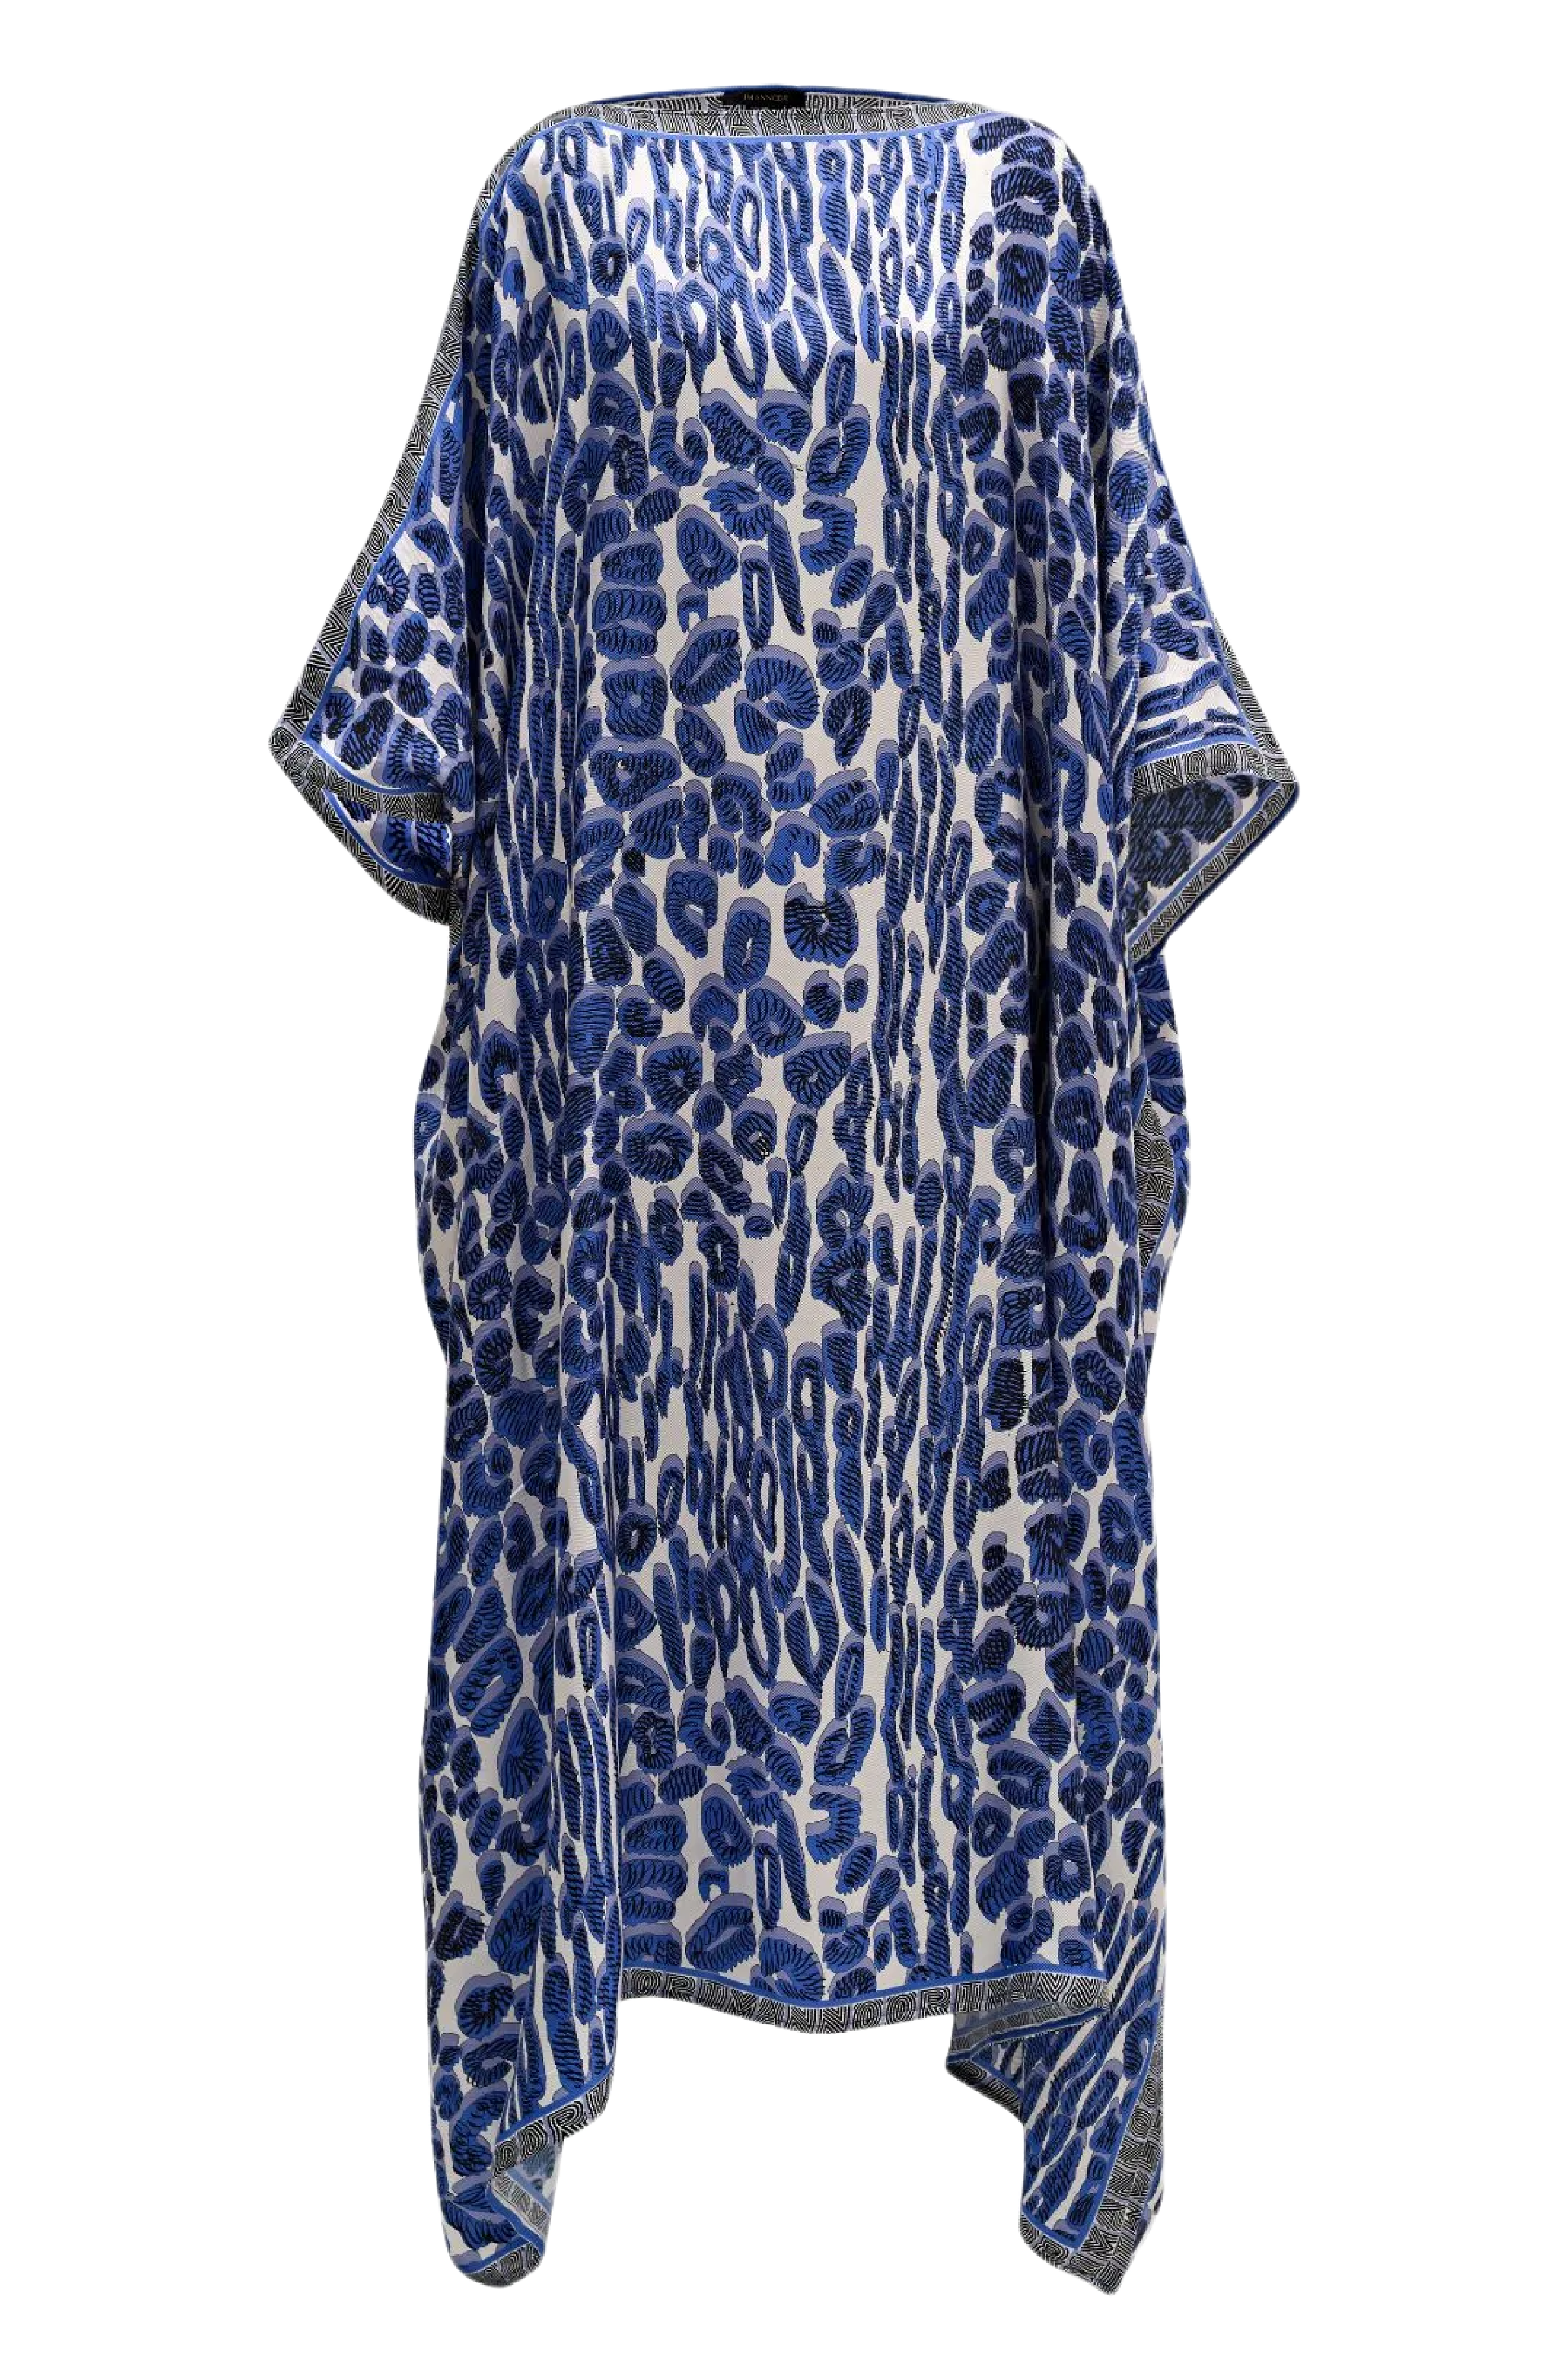 Leopard of the East Caftan